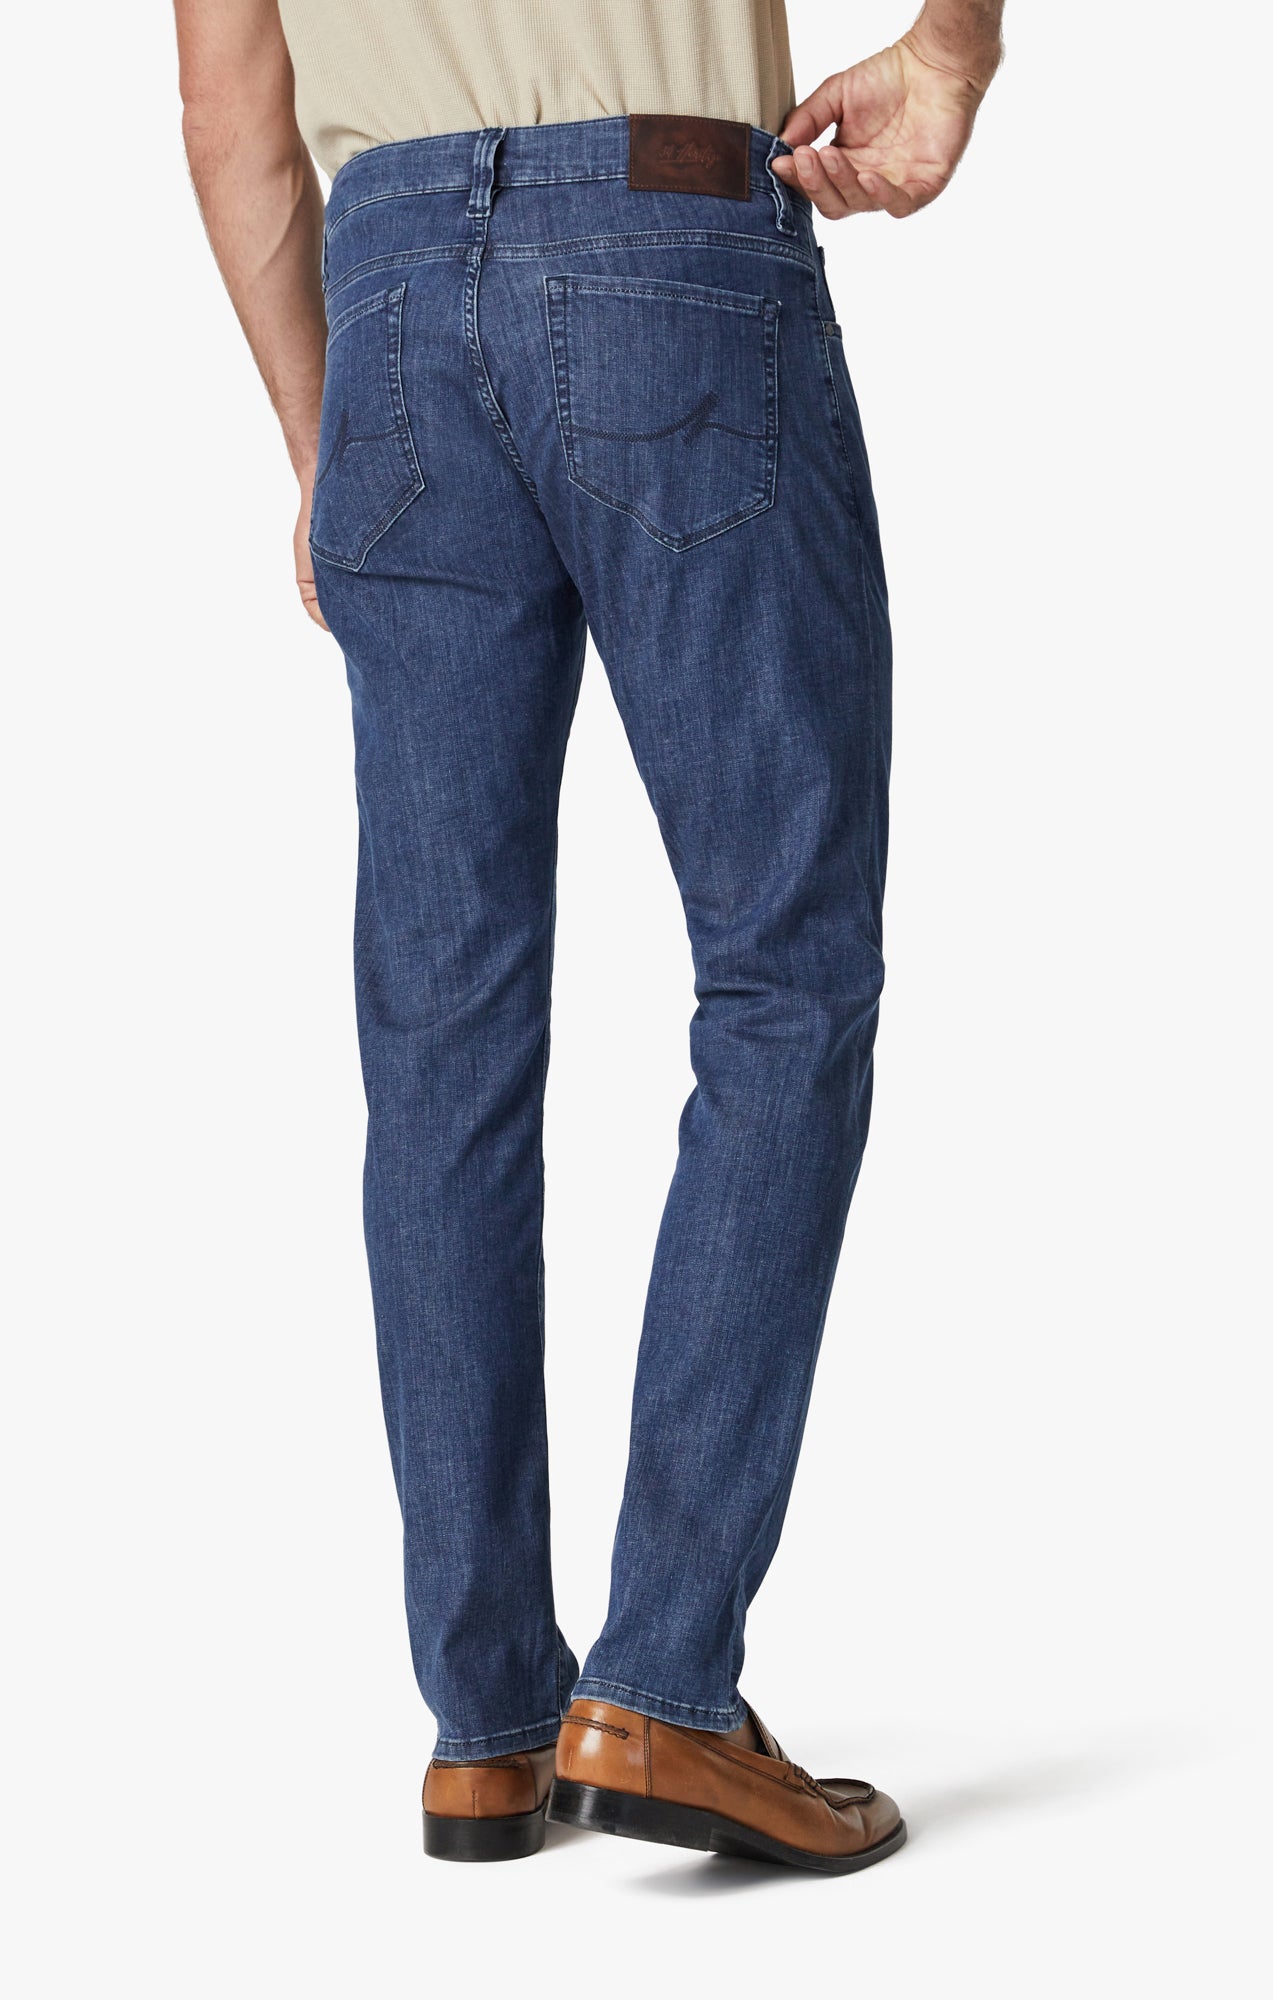 Charisma Relaxed Straight Leg Jeans In Mid Kona